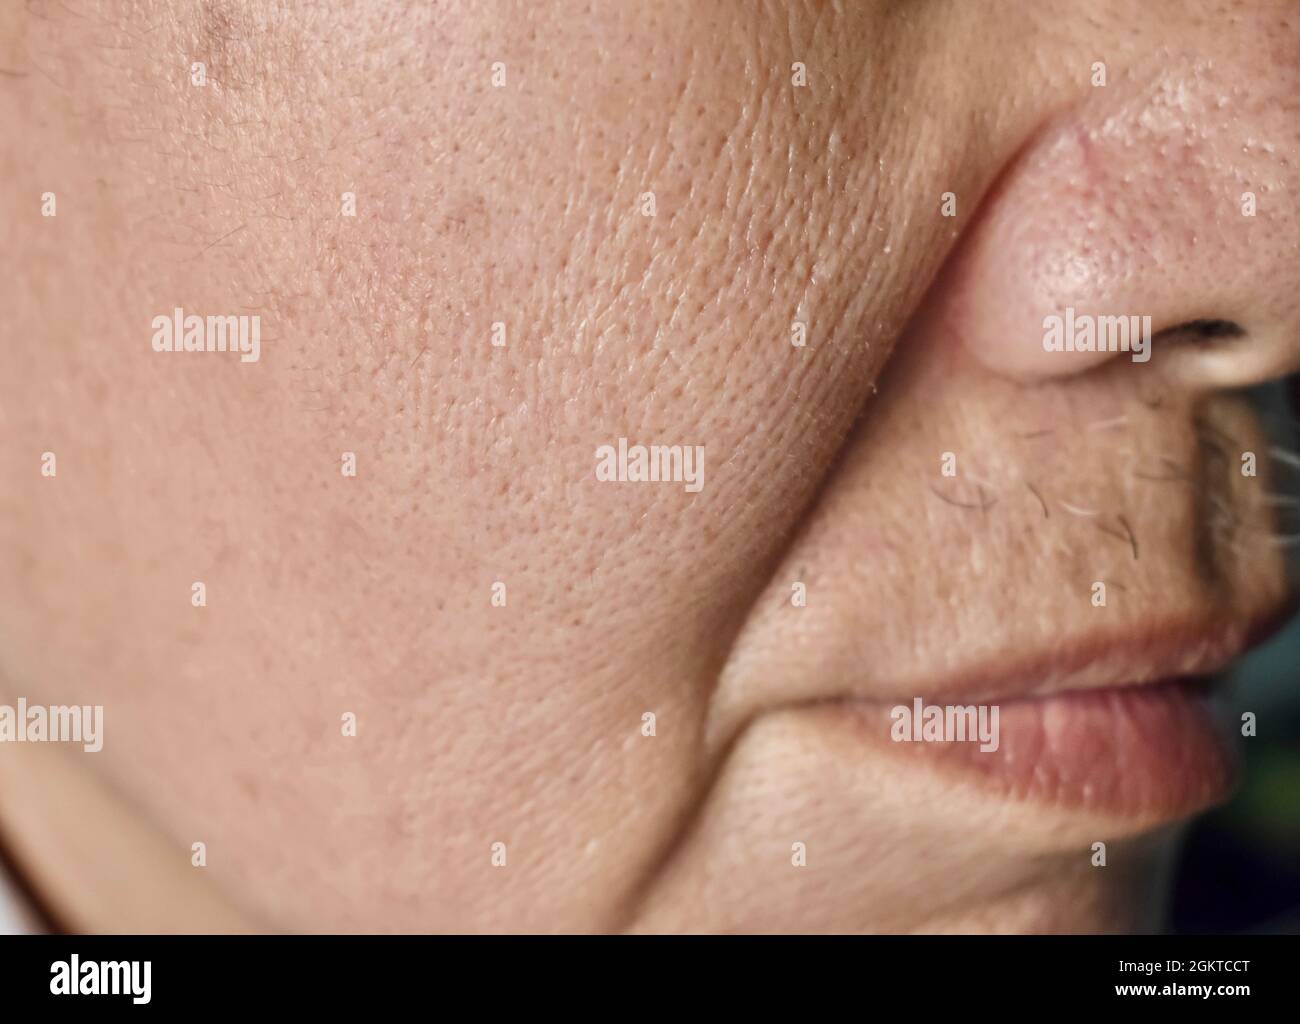 Enlarged pores in face of Southeast Asian, Chinese elder man with skin folds. Stock Photo